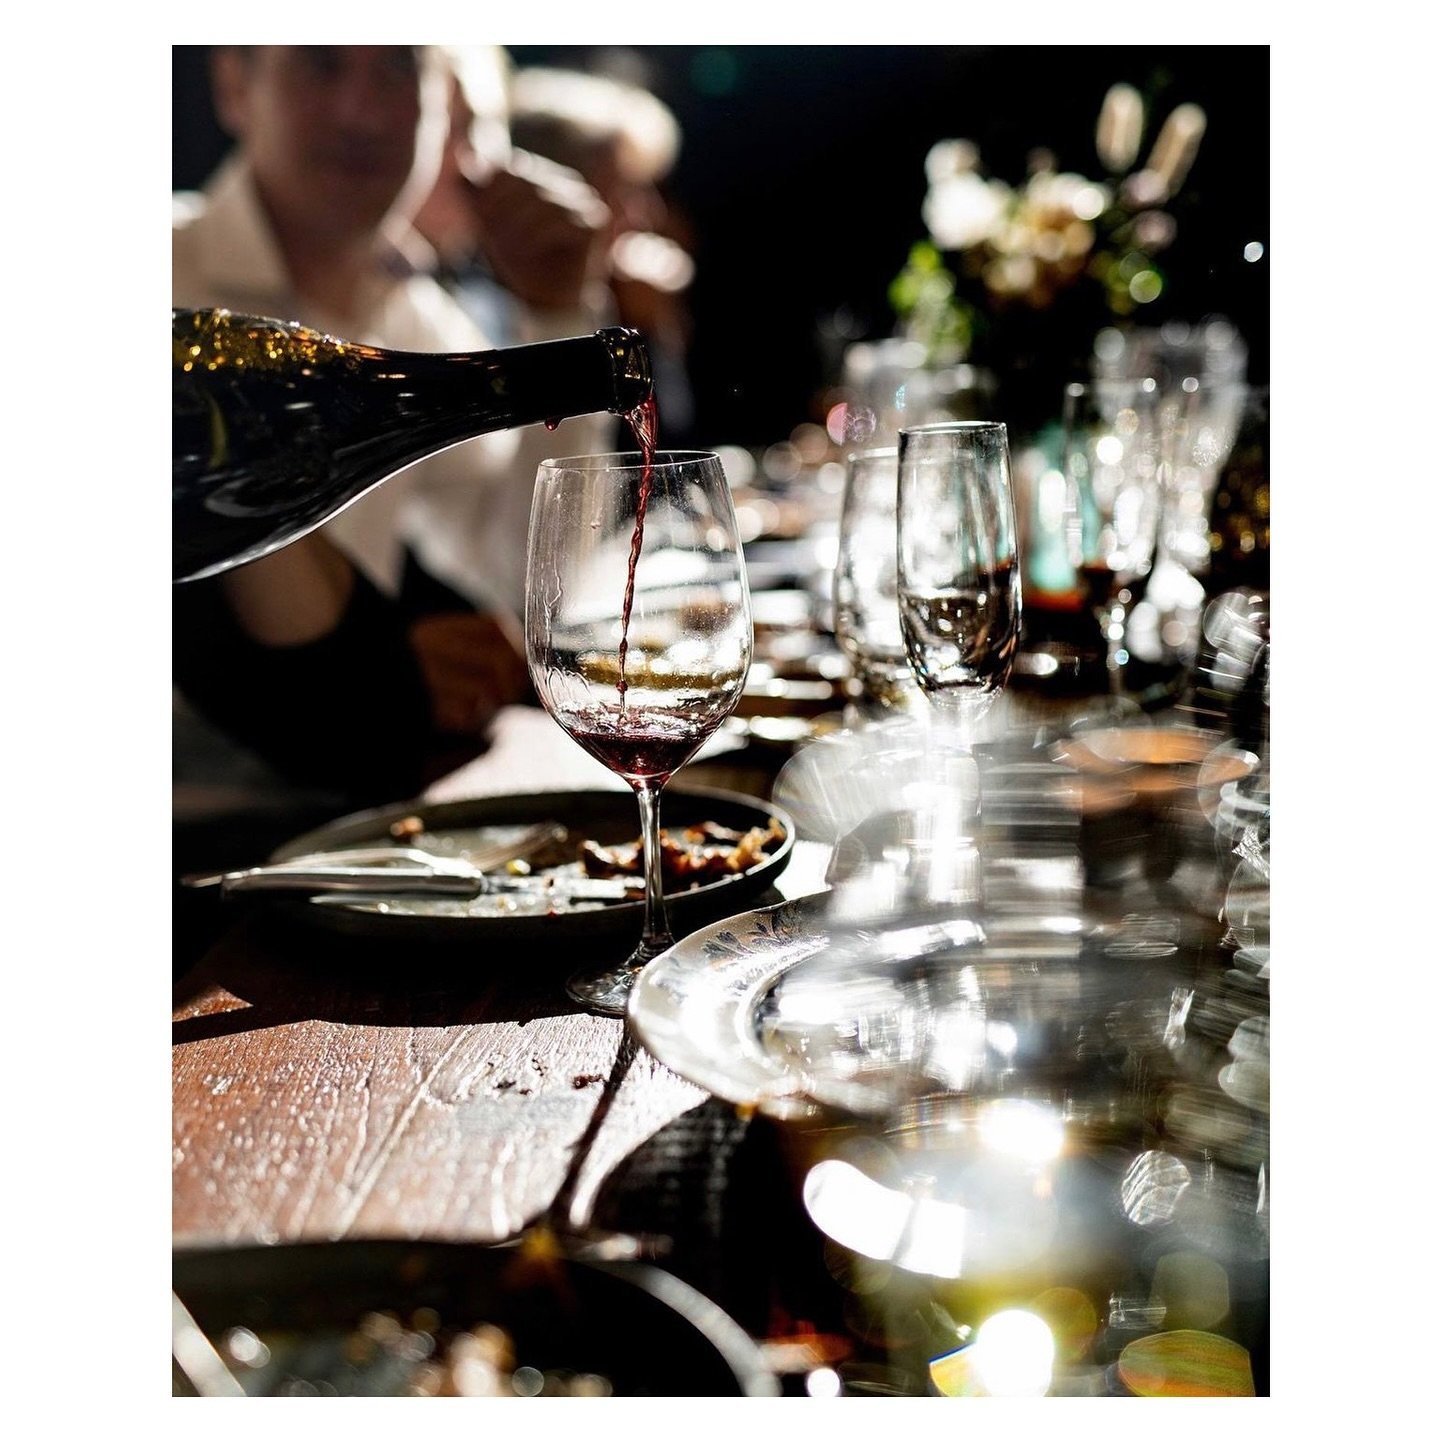 📣 WINE DINNER NEWS! A couple of tables have opened up for Wednesday night&rsquo;s sold-out Unicorn wine dinner (rare wines, special wines, wow wines) due to some last-minute cancellations. These dinners sell out in minutes with good reason and this 